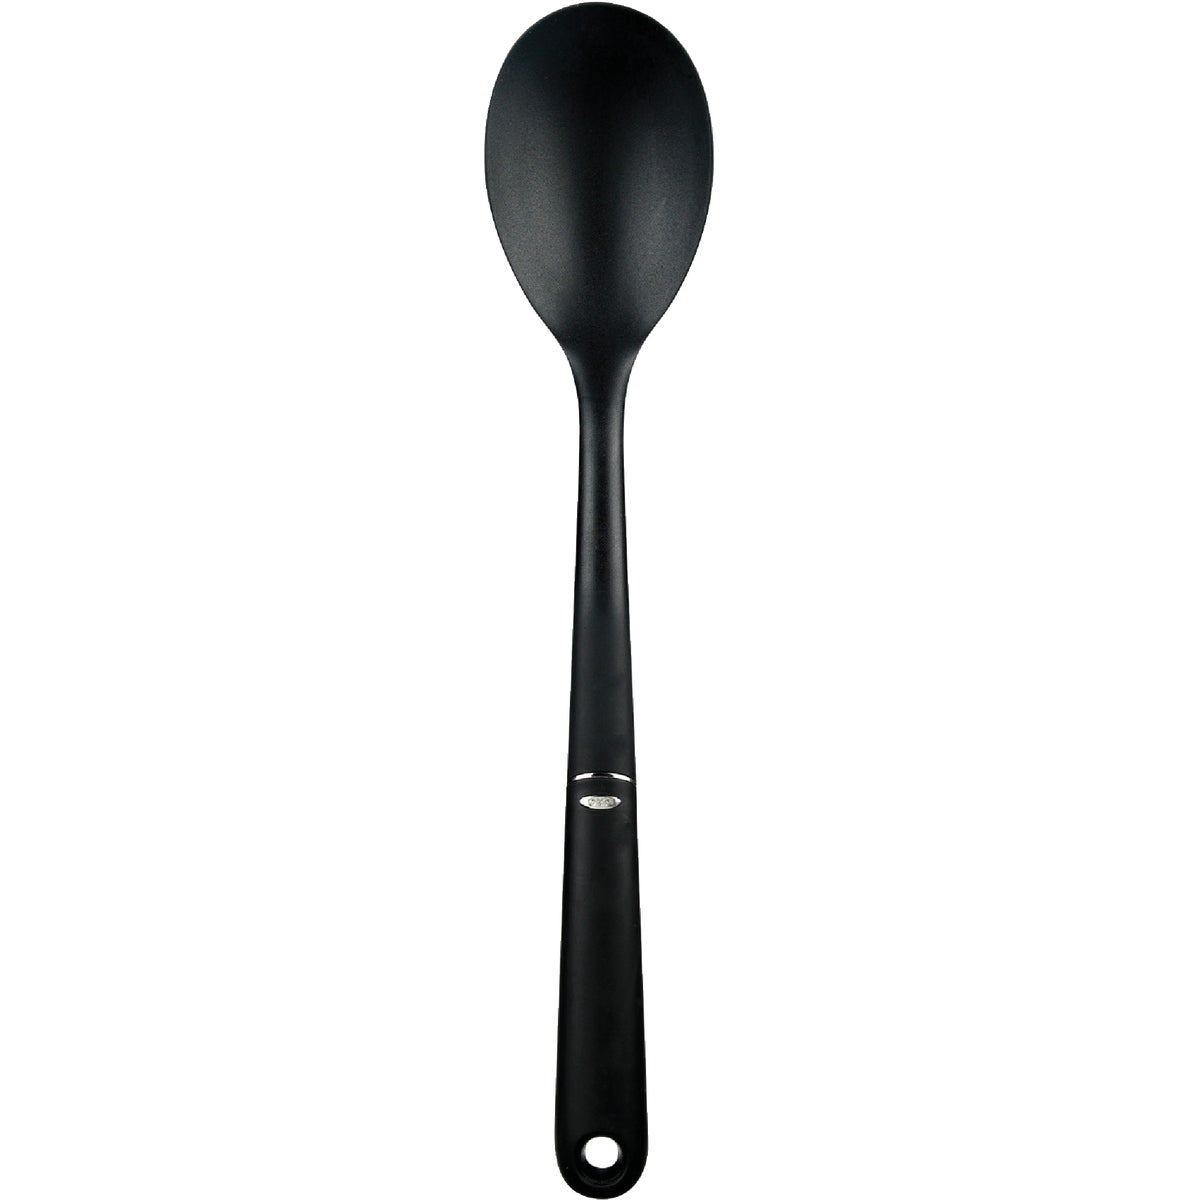 Item 620073, Nylon spoon is perfect for stirring soups, sauces, stews, and chili.